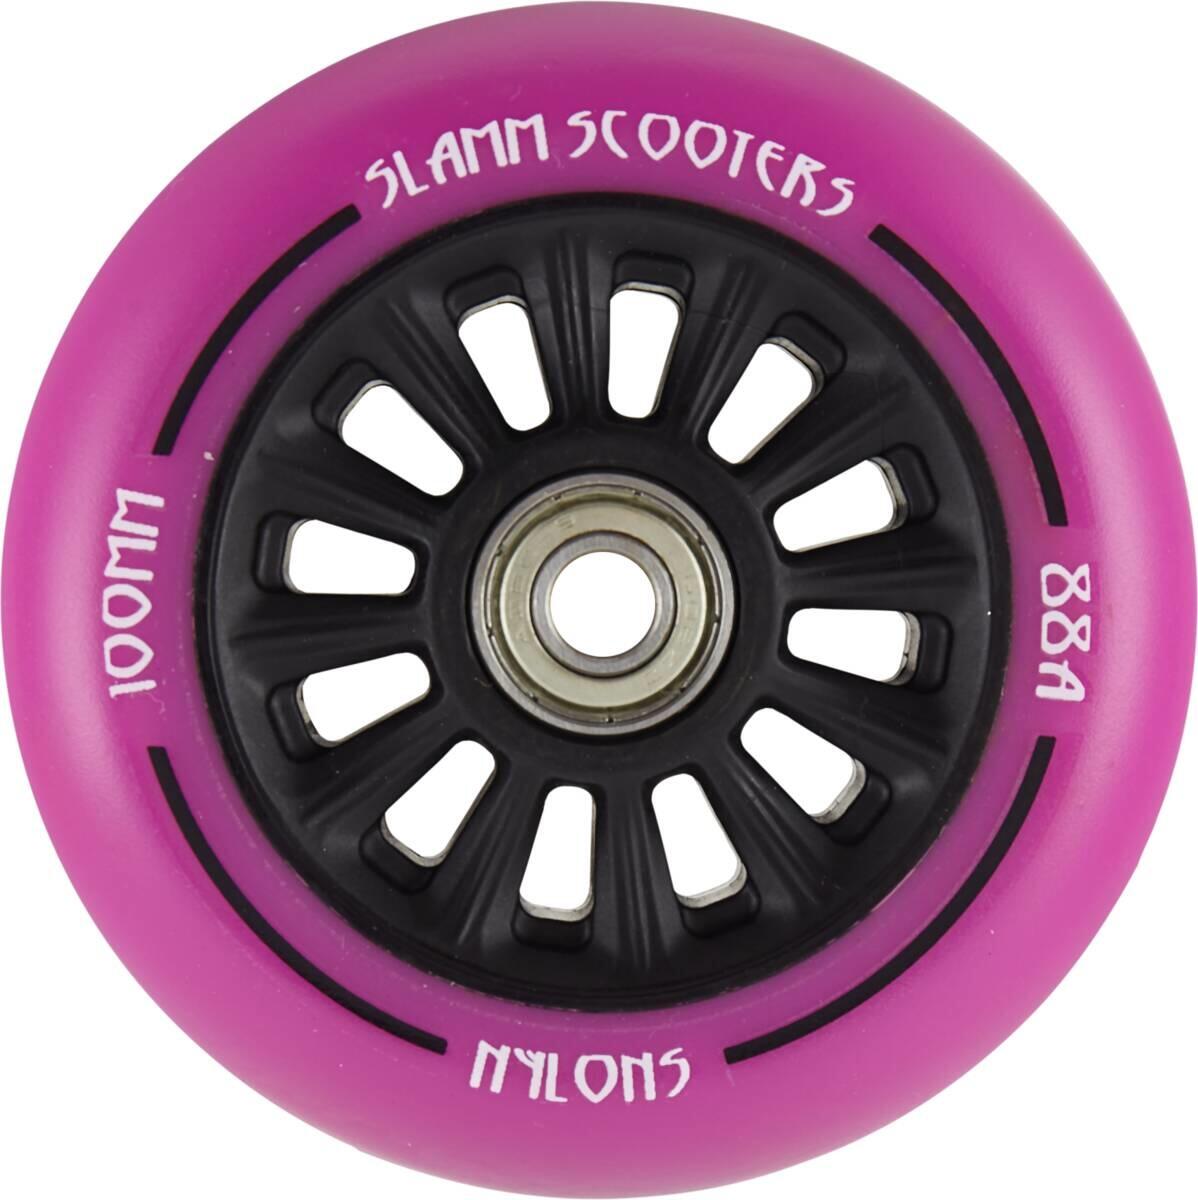 Nylon Core 100mm Scooter Wheel and Bearings 2/3